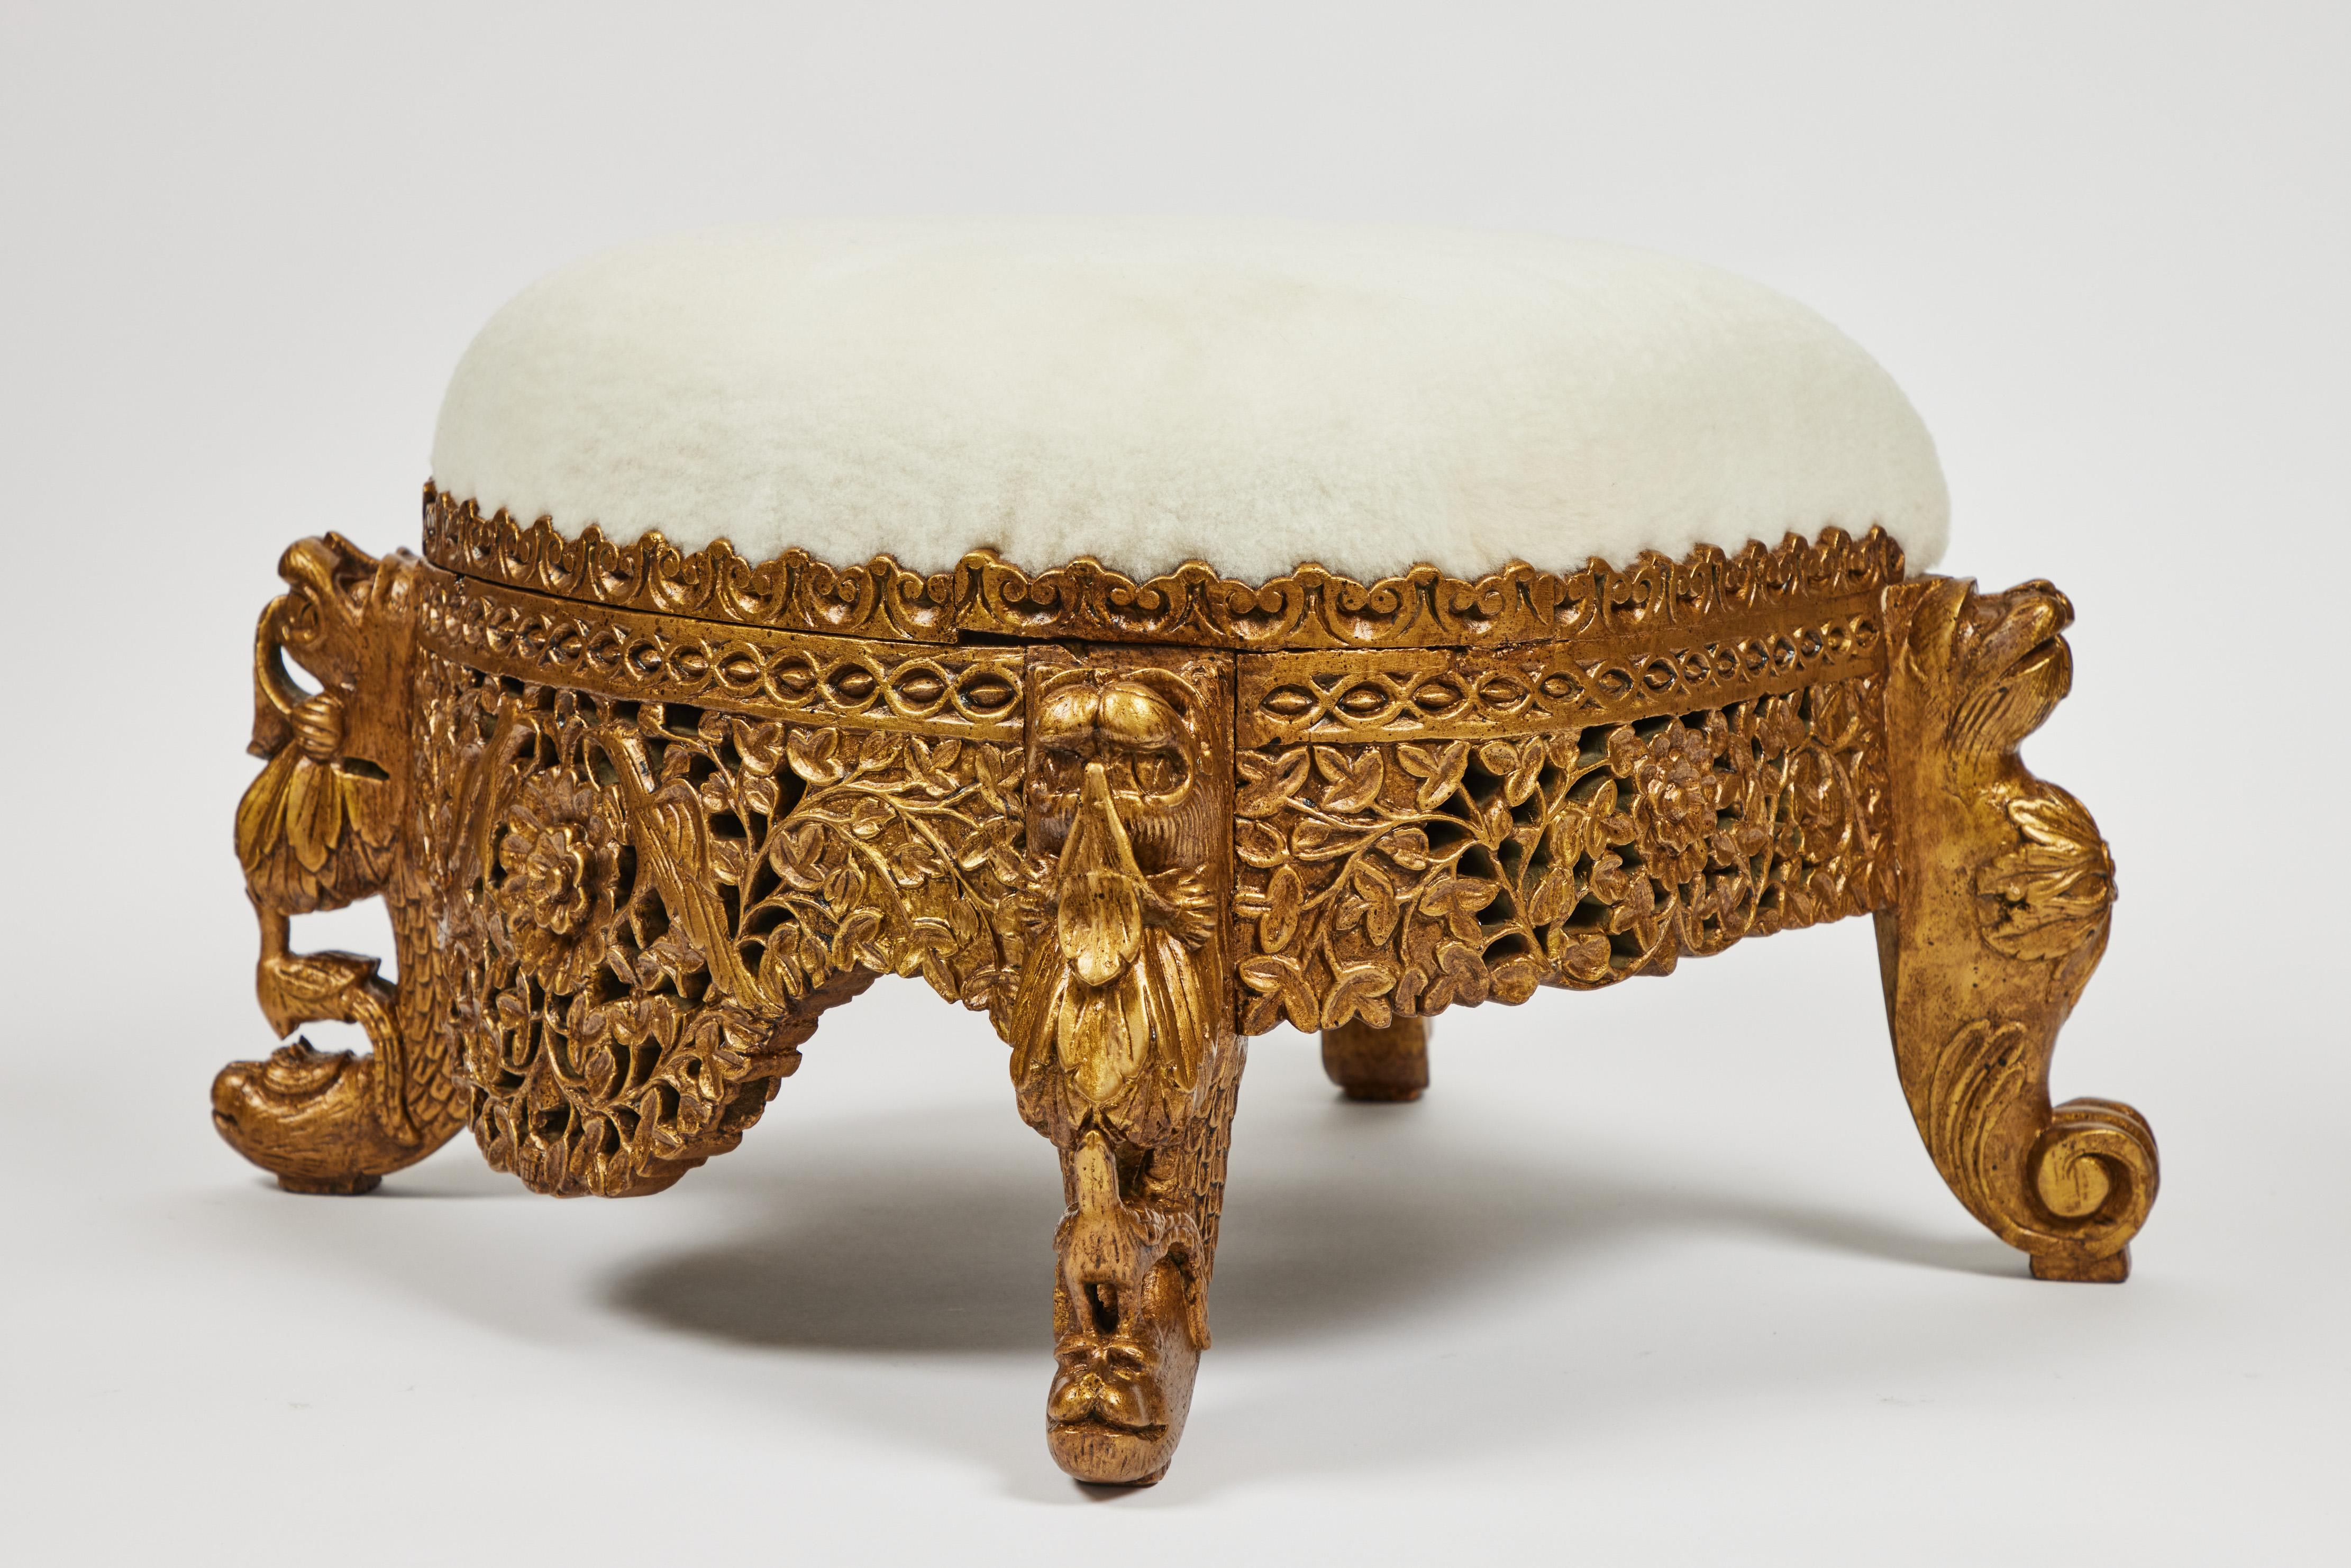 Hand-Carved Vintage Carved Wood Stool Hand Painted Gold Finish + Shearling Cushion